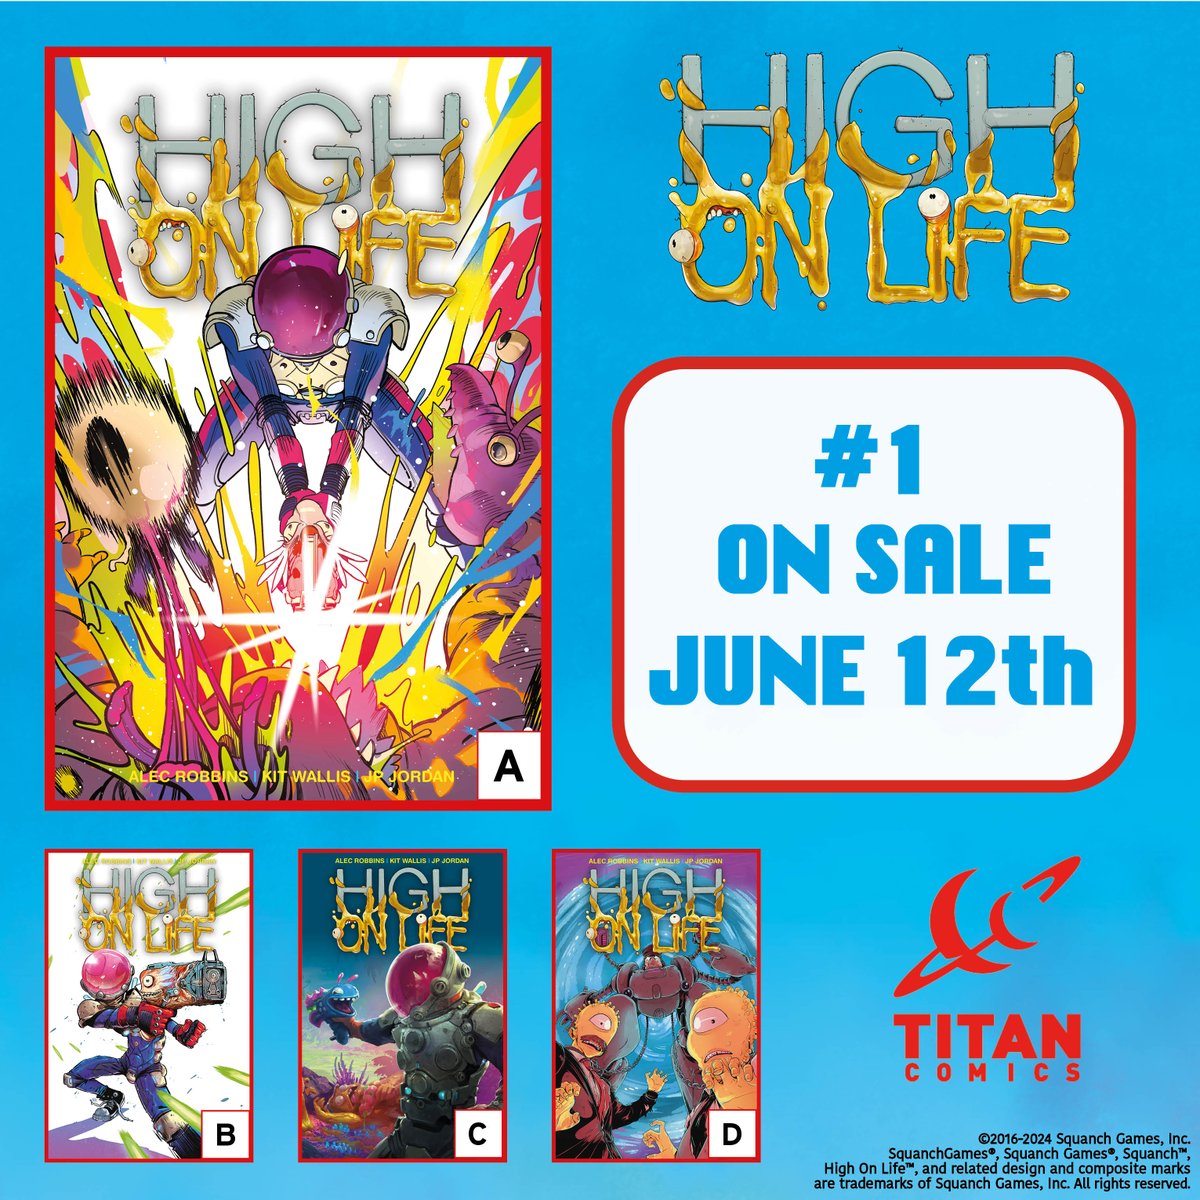 New to buying comics and don't know how to order HIGH ON LIFE #1? Don't panic! We have you covered. Check out this handy guide on how to order your copy here: titan-comics.com/news/pre-order…